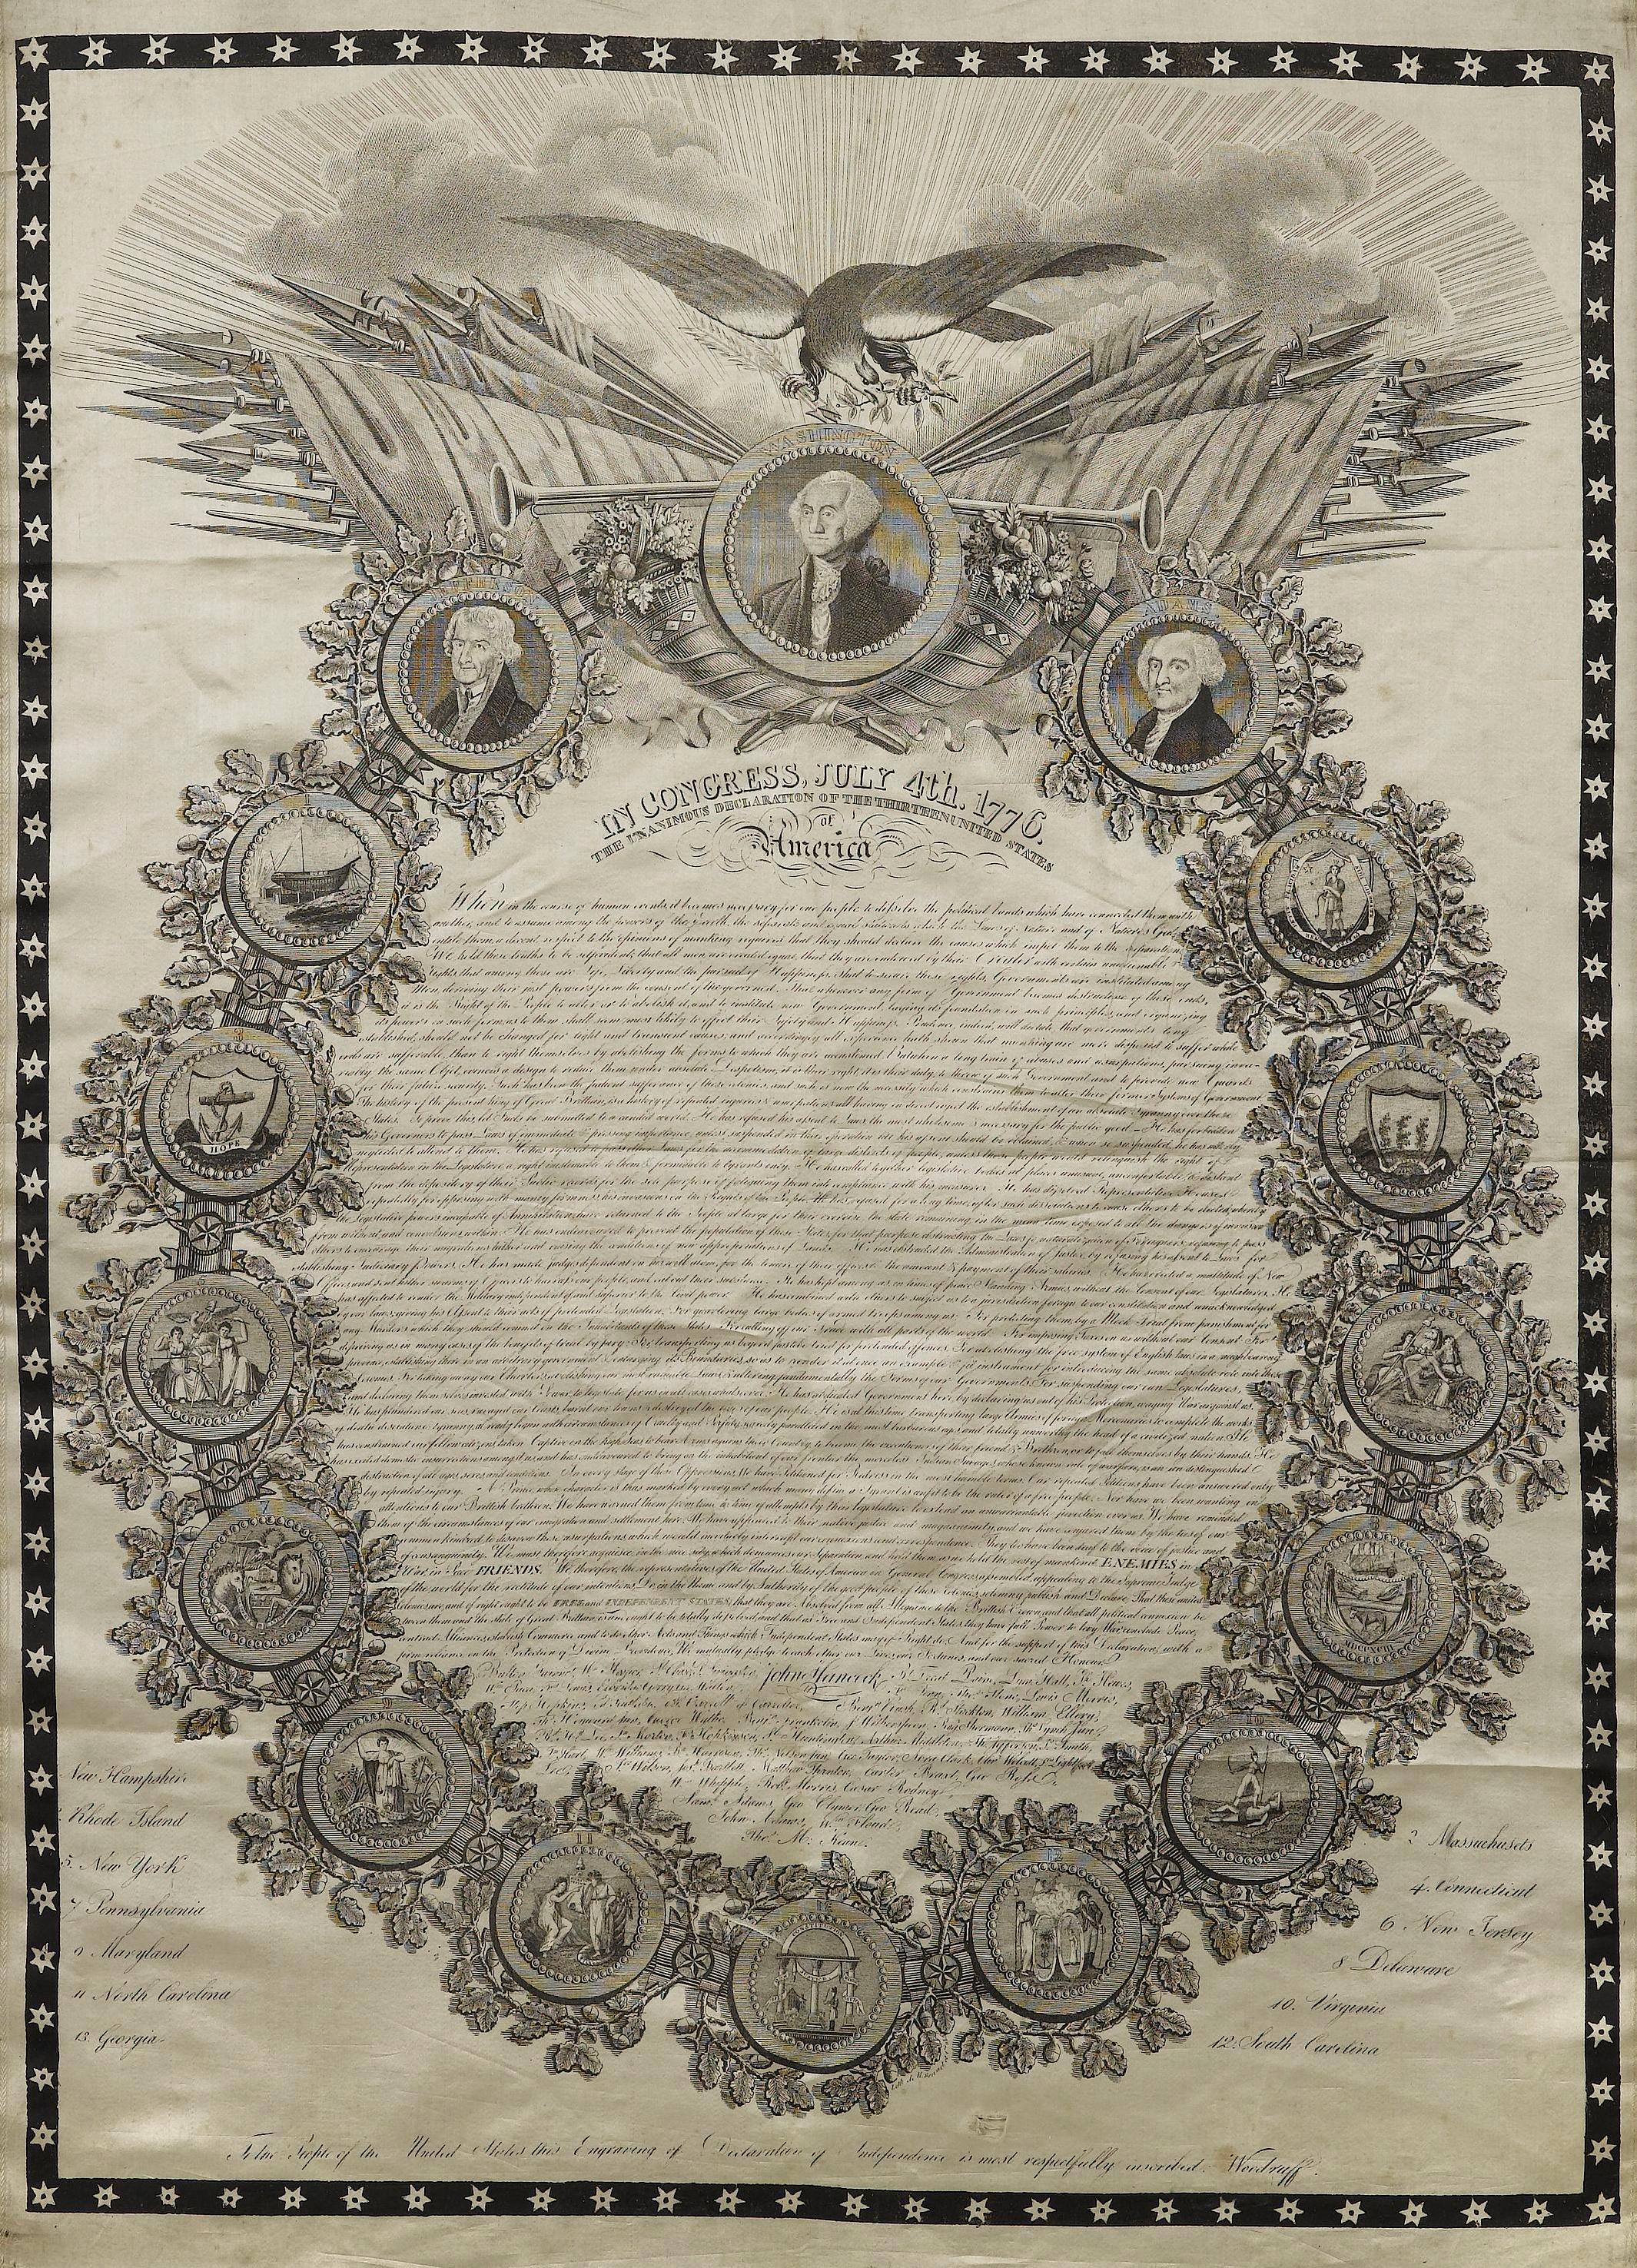 French Early Printing of the Declaration of Independence on Silk, 1820